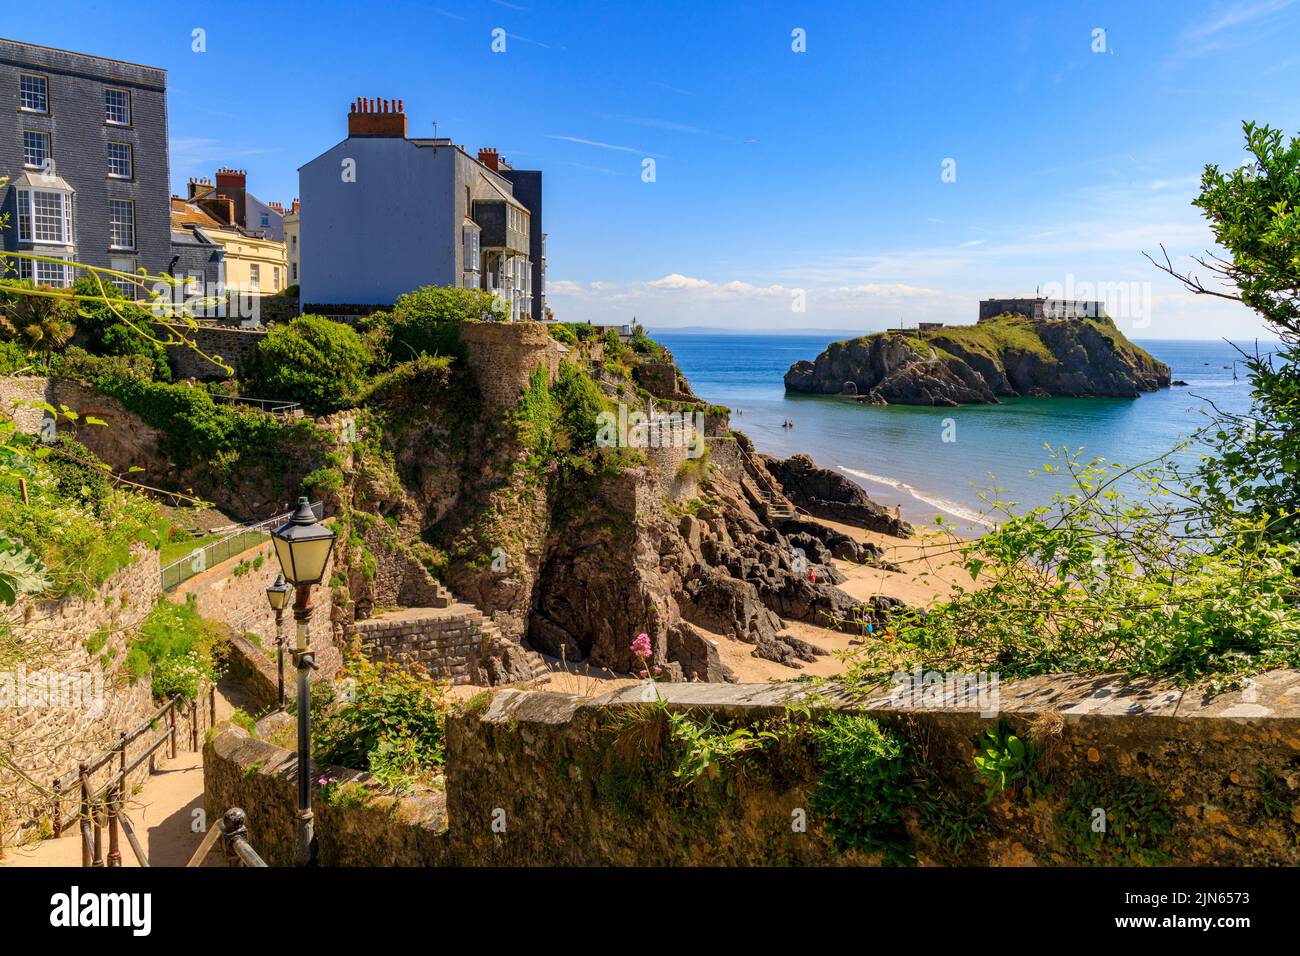 St Catherine's Island and fort viewed from the beach steps in Tenby, Pembrokeshire, Wales, UK Stock Photo